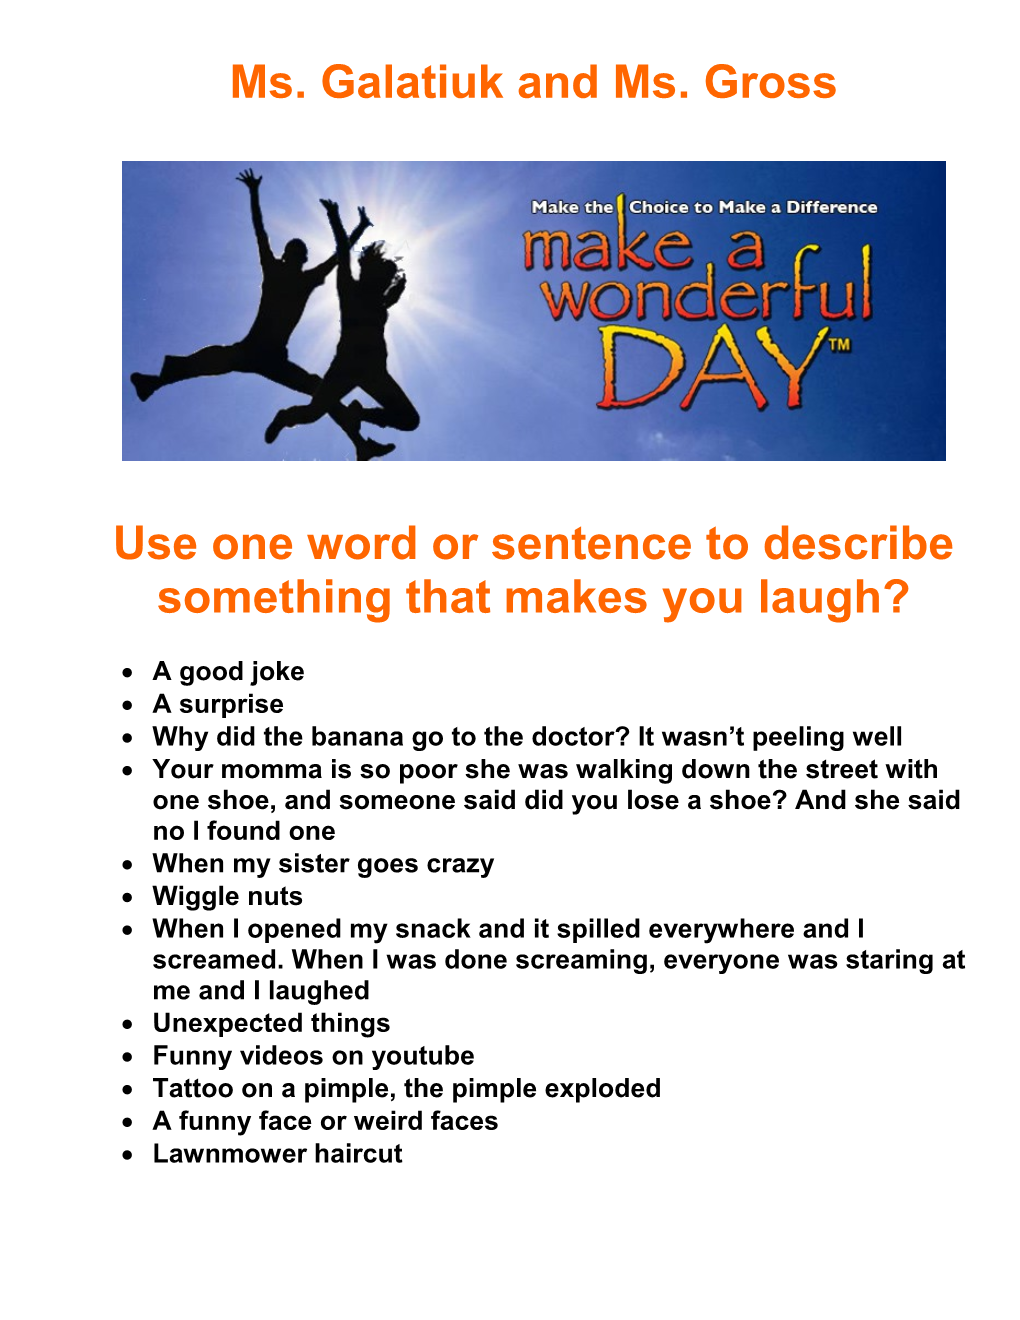 Use One Word Or Sentence to Describe Your Most Wonderful Day at School